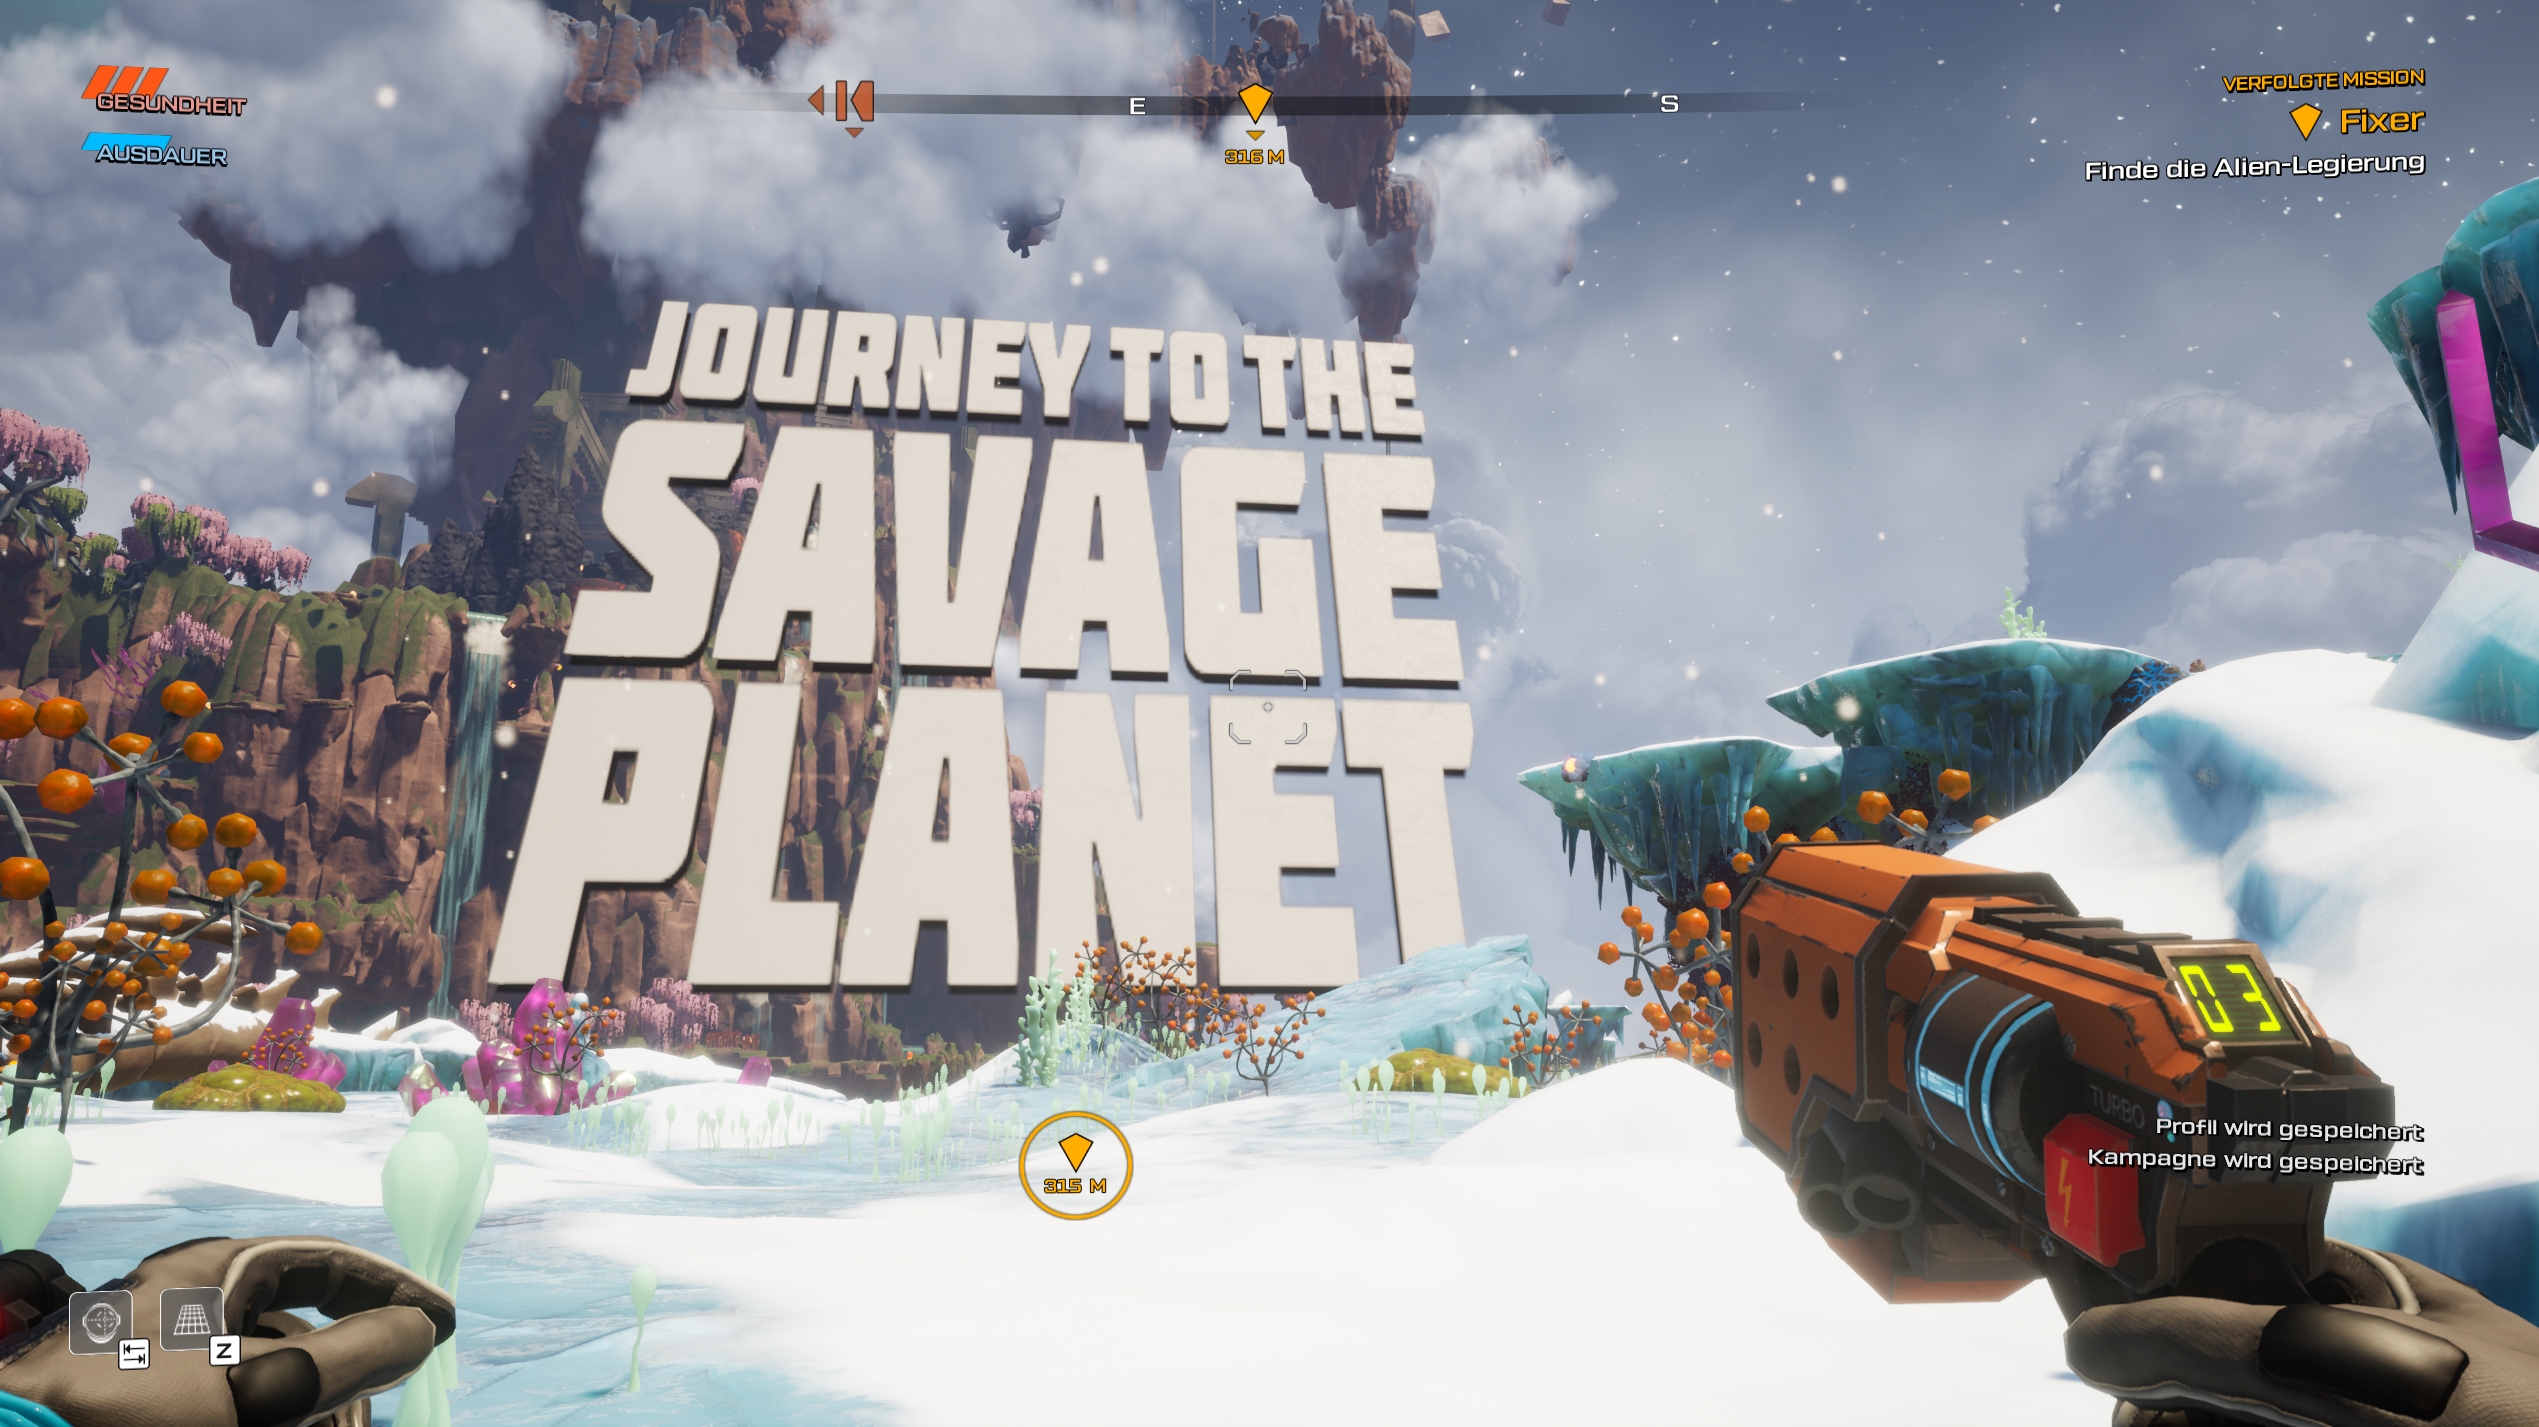 Journey to the savage planet